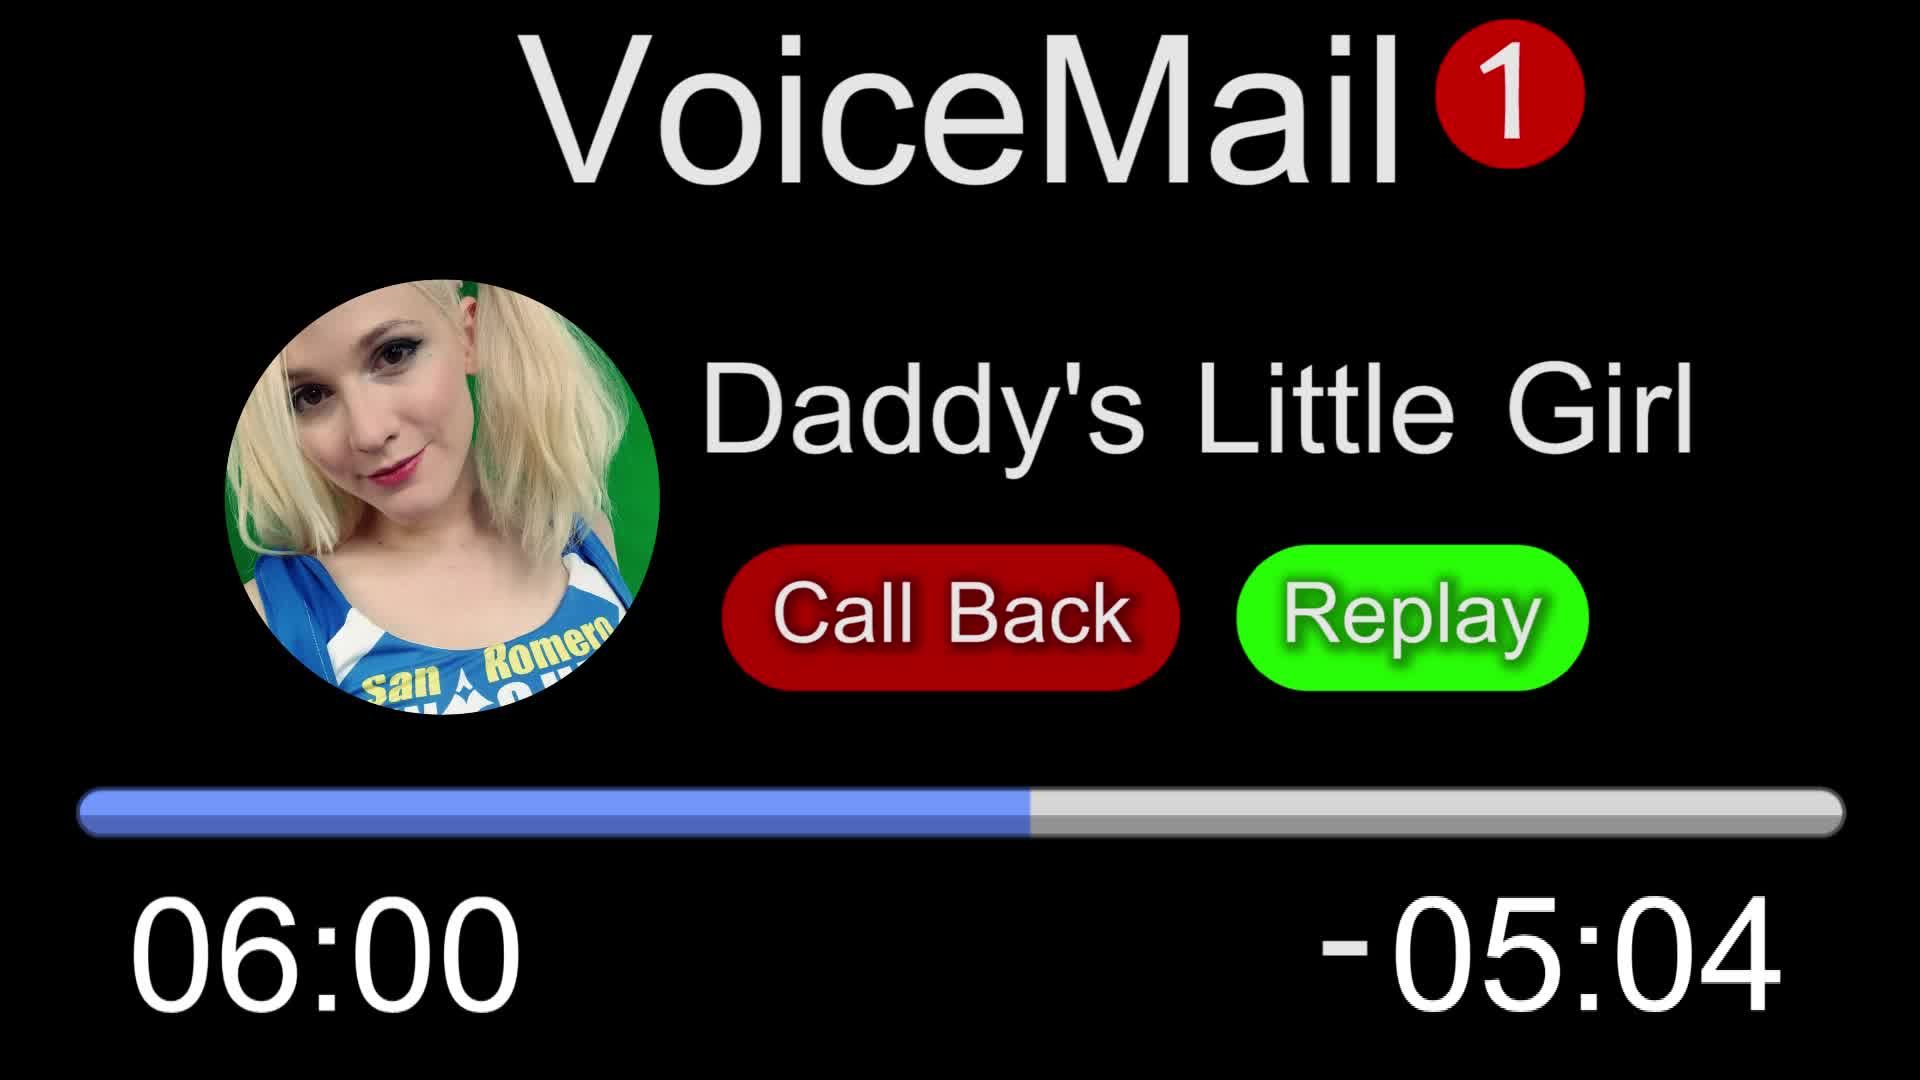 Voicemail to Daddy